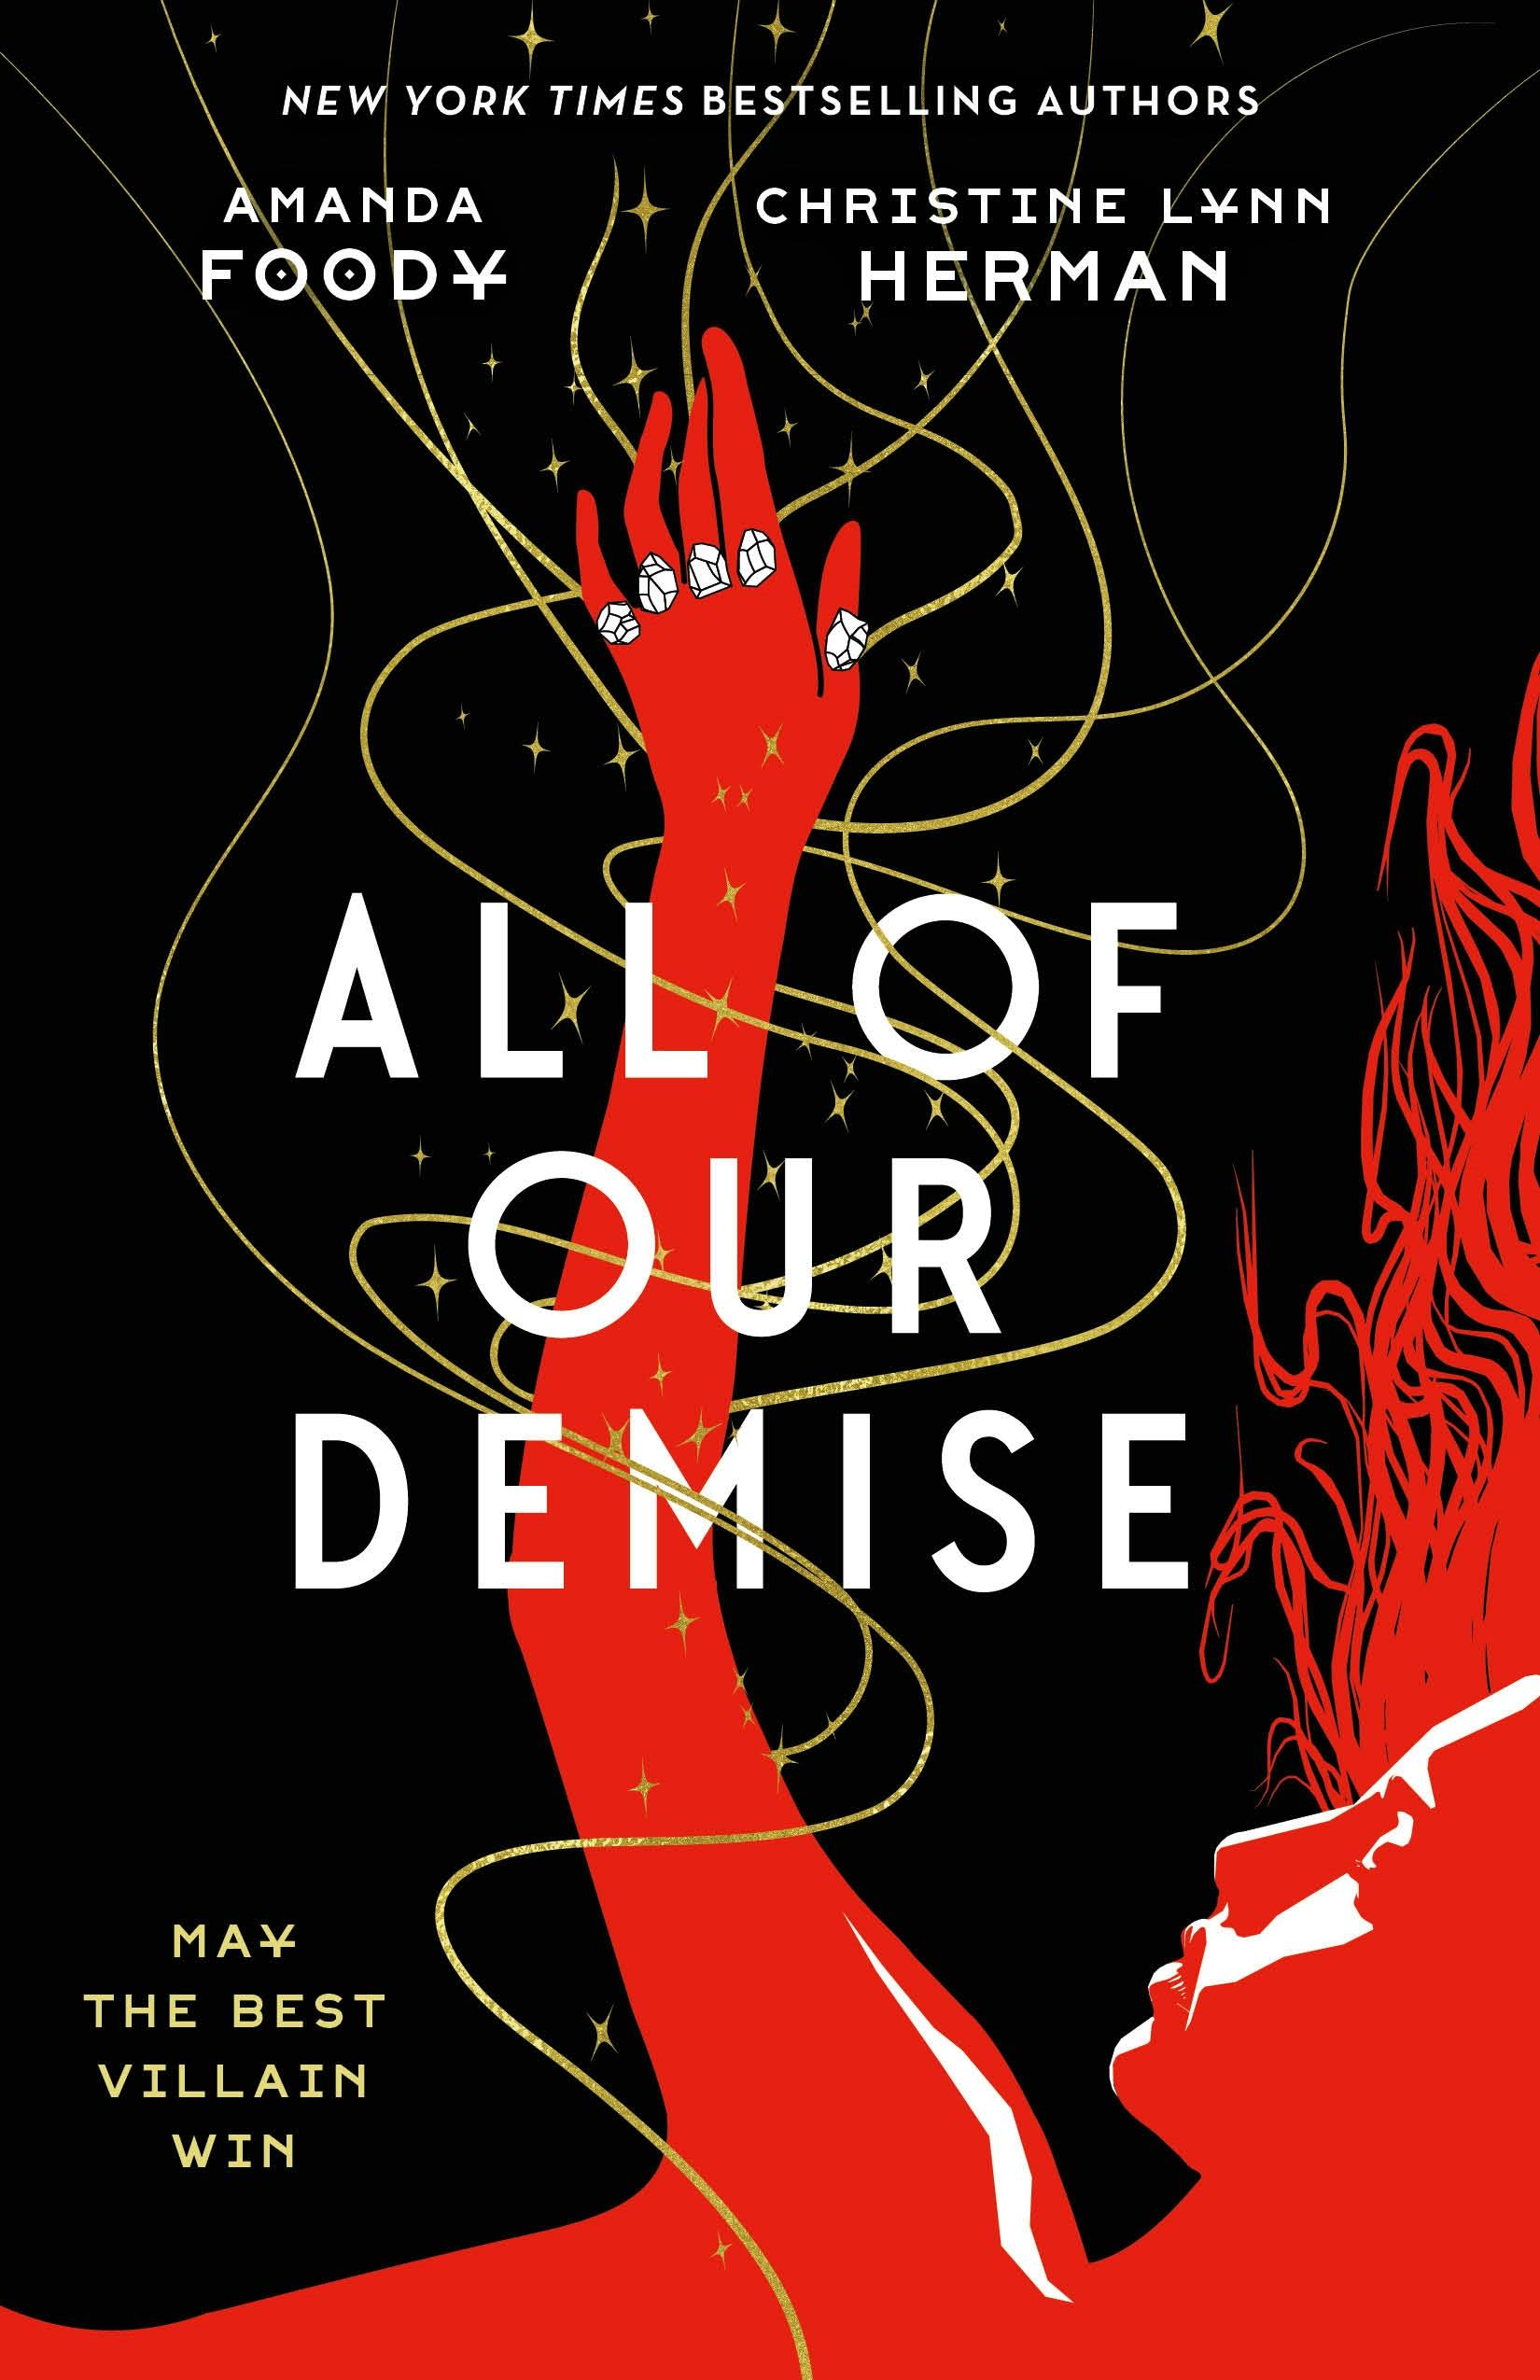 Cover for the book titled as: All of Our Demise